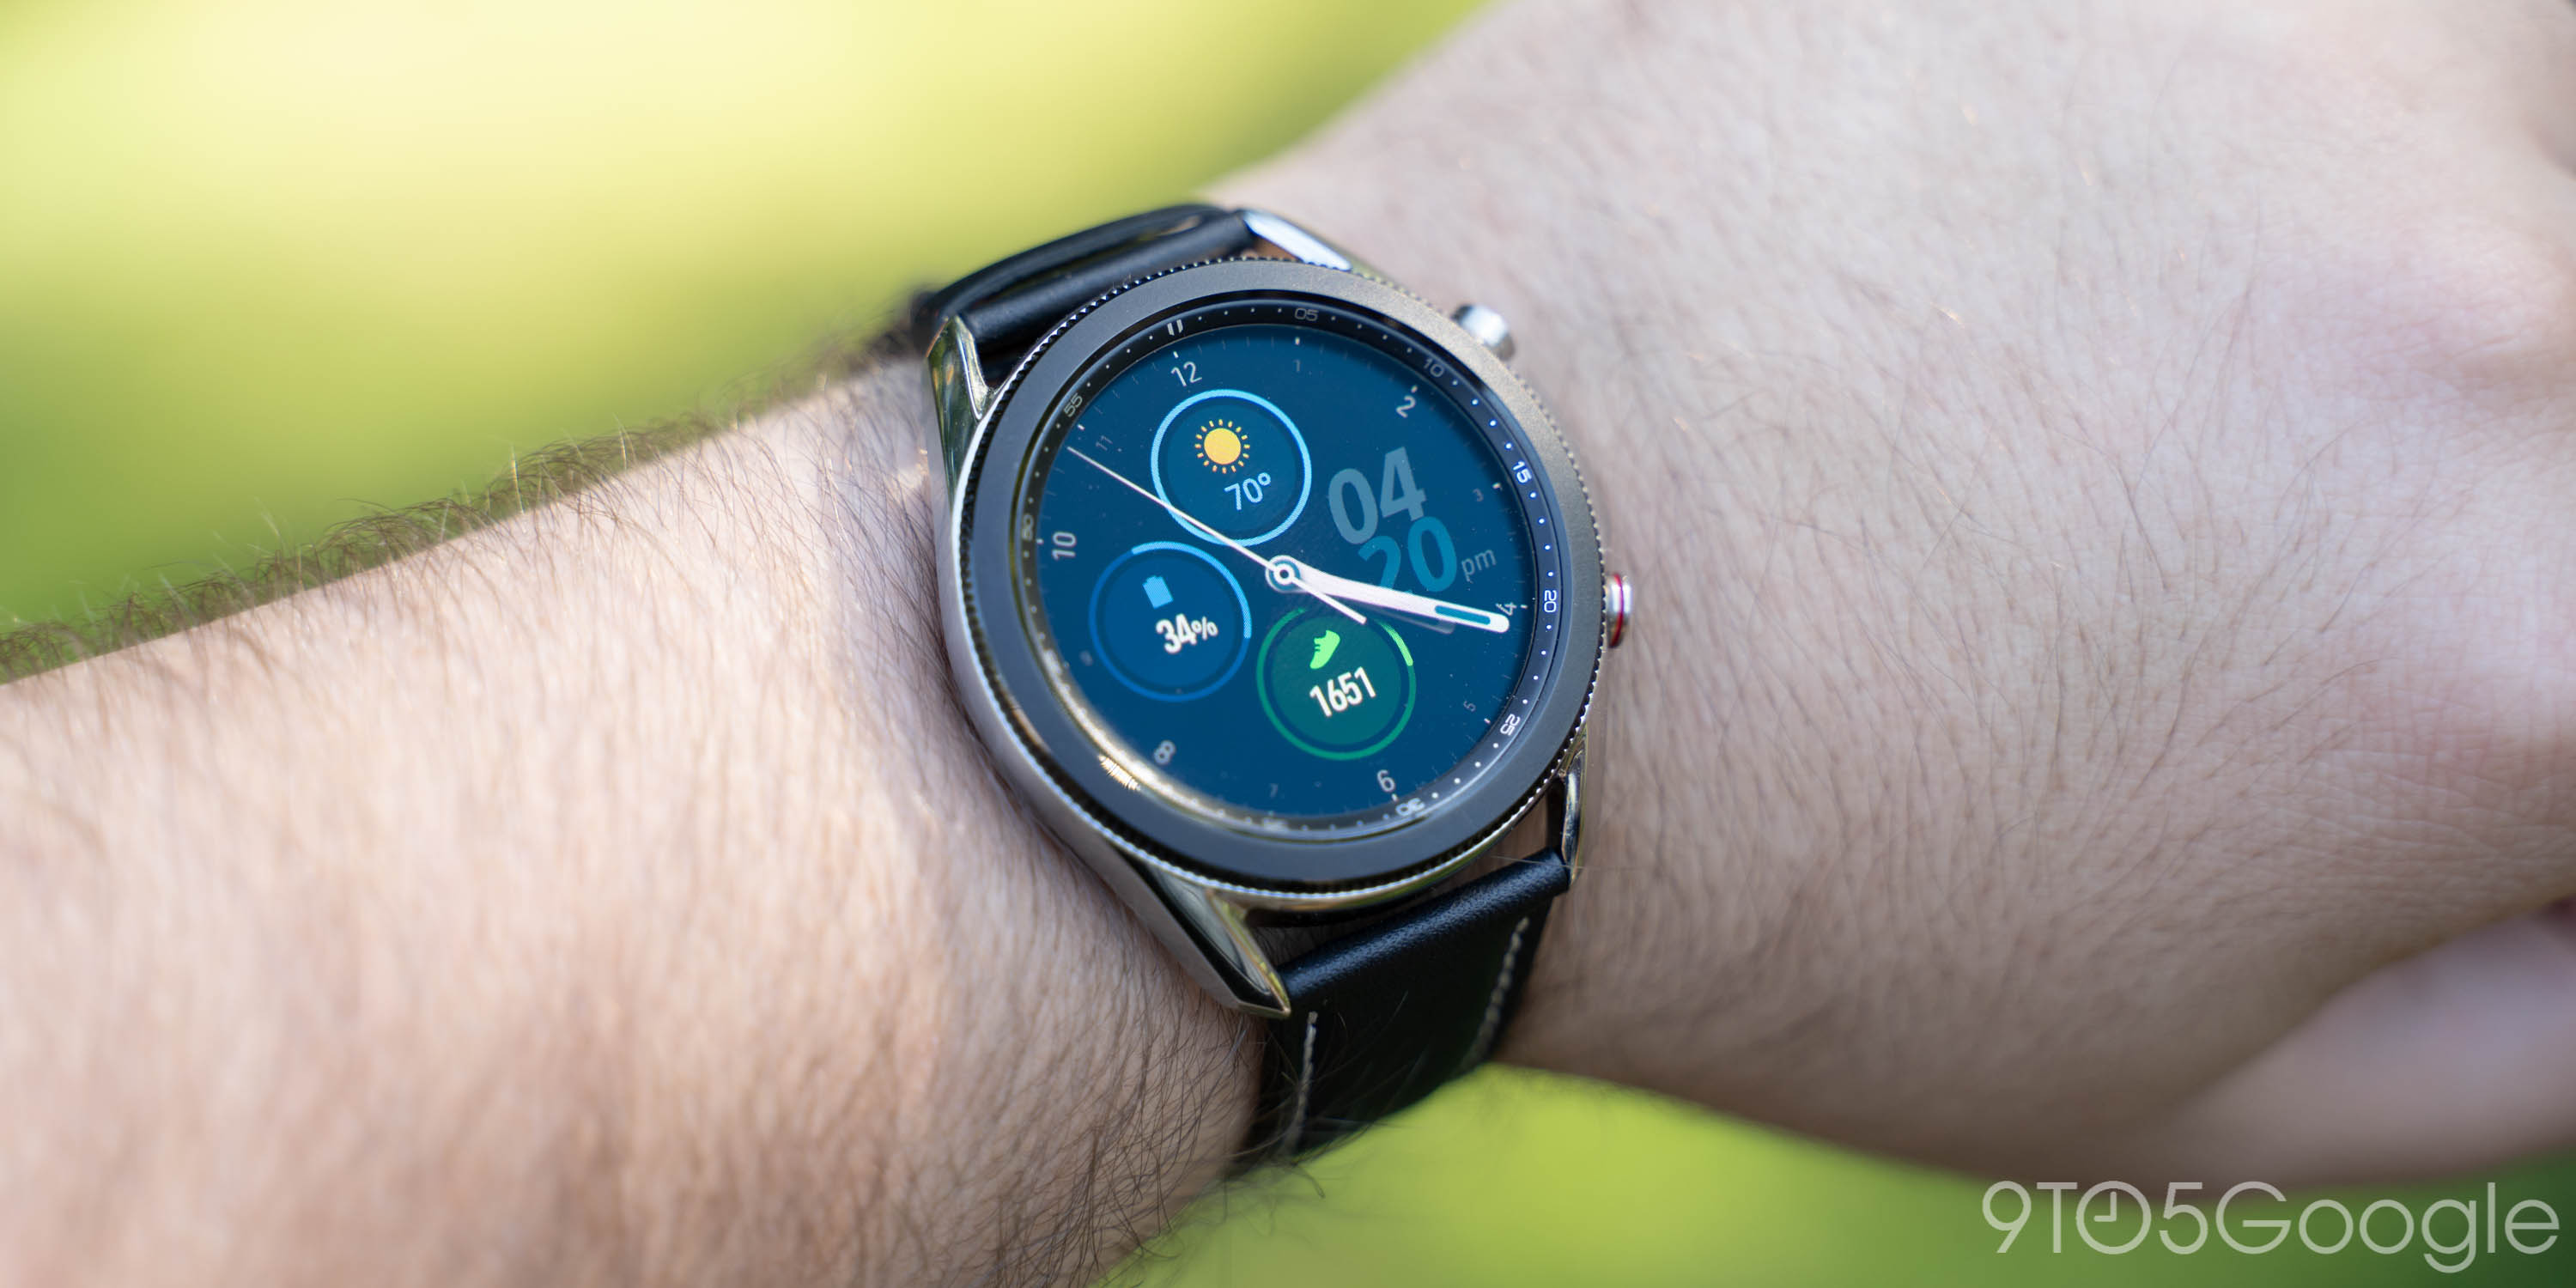 Samsung Galaxy Watch 5 review: Premium smartwatch packed with features